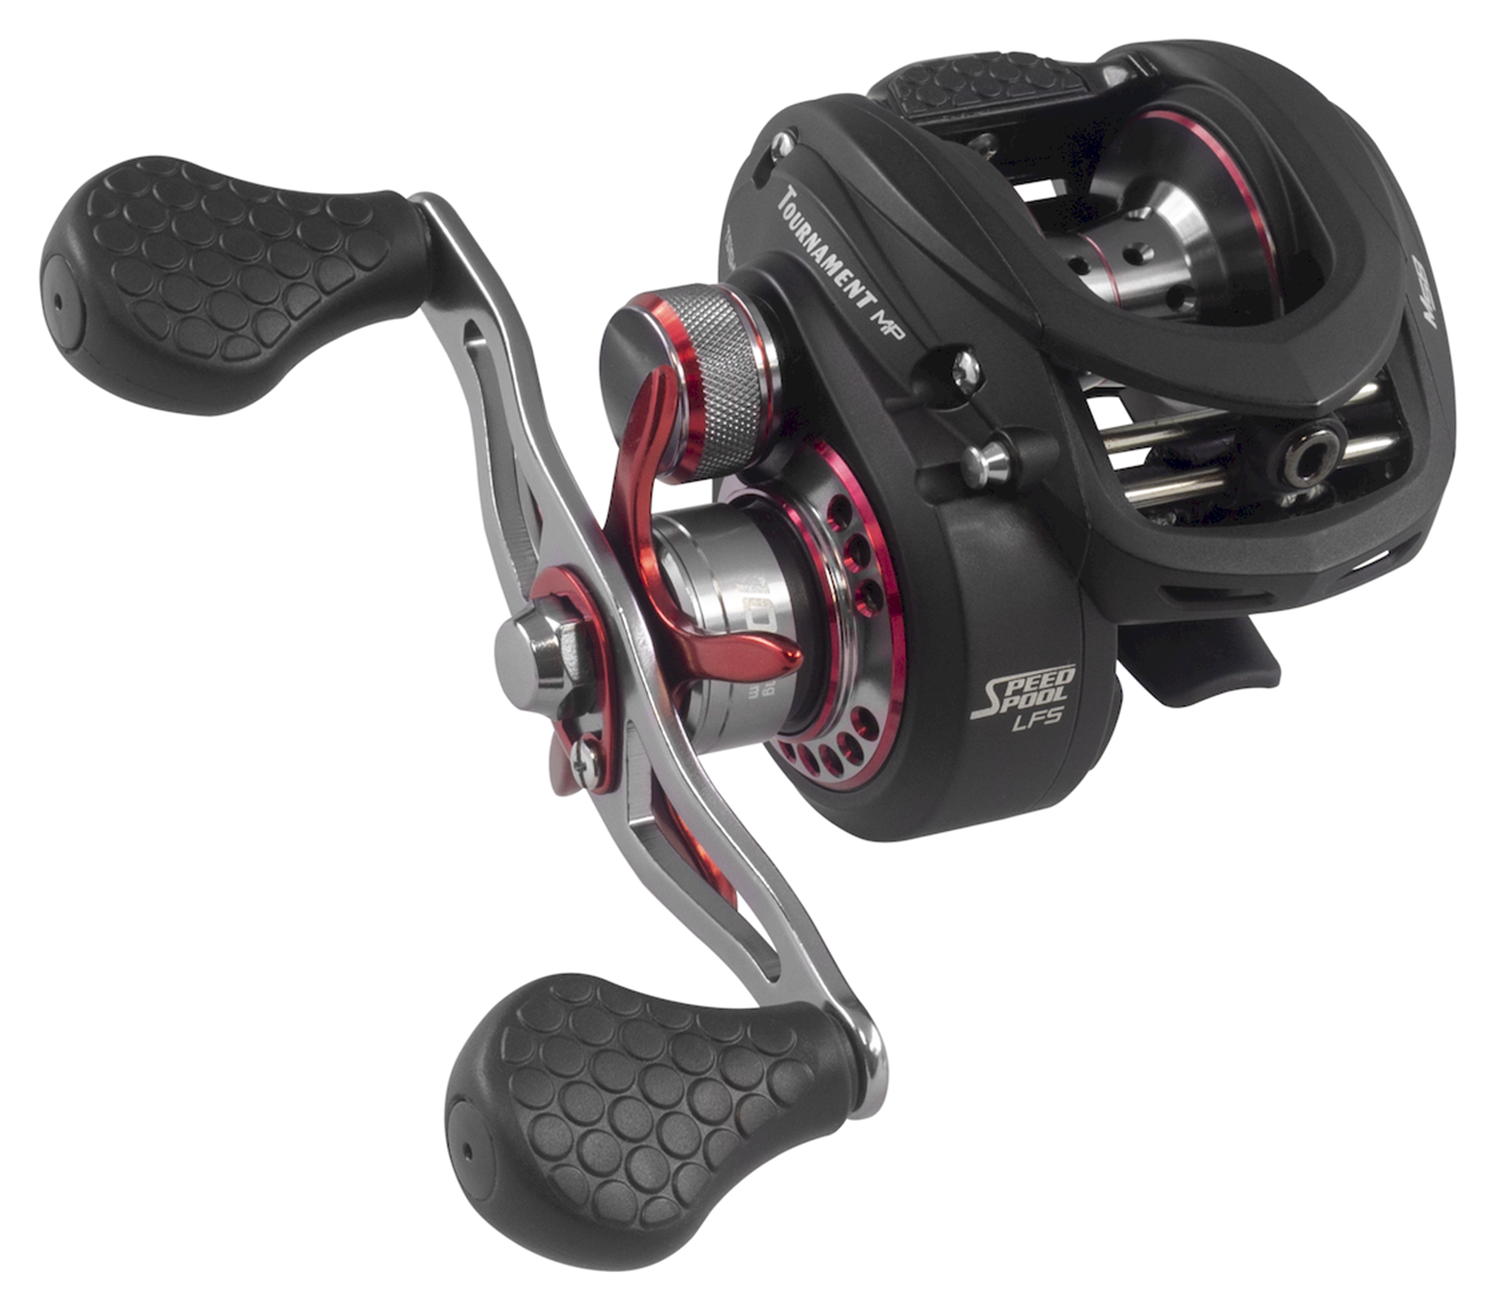 Lew's LWTS1XHMP Tournament MP Baitcast Reel with Free S&H — CampSaver